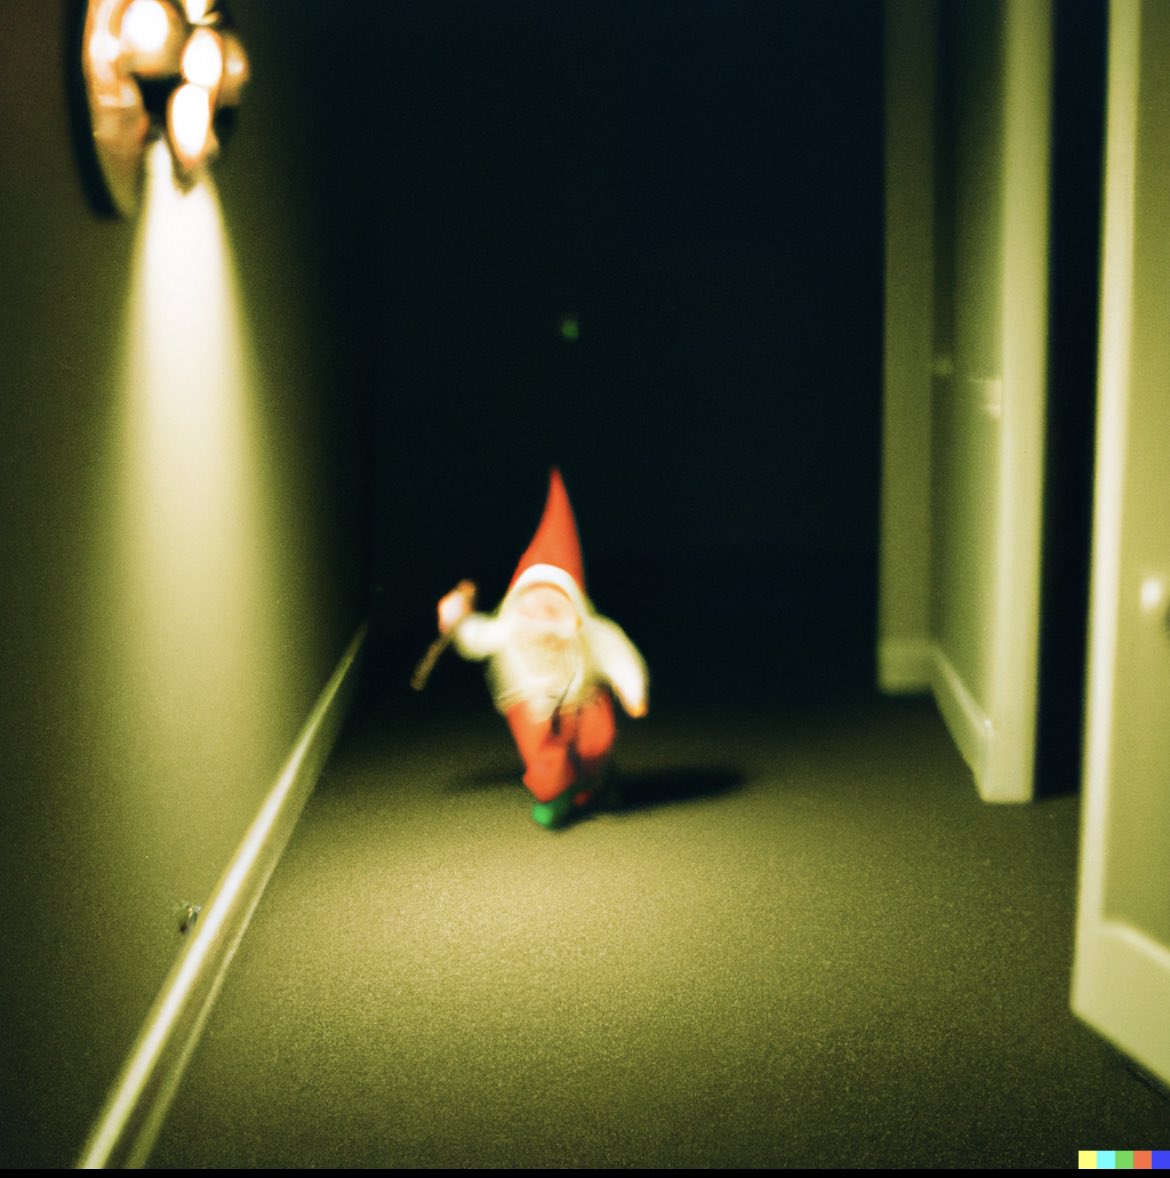 Photo of a gnome with a knife running in a hallway